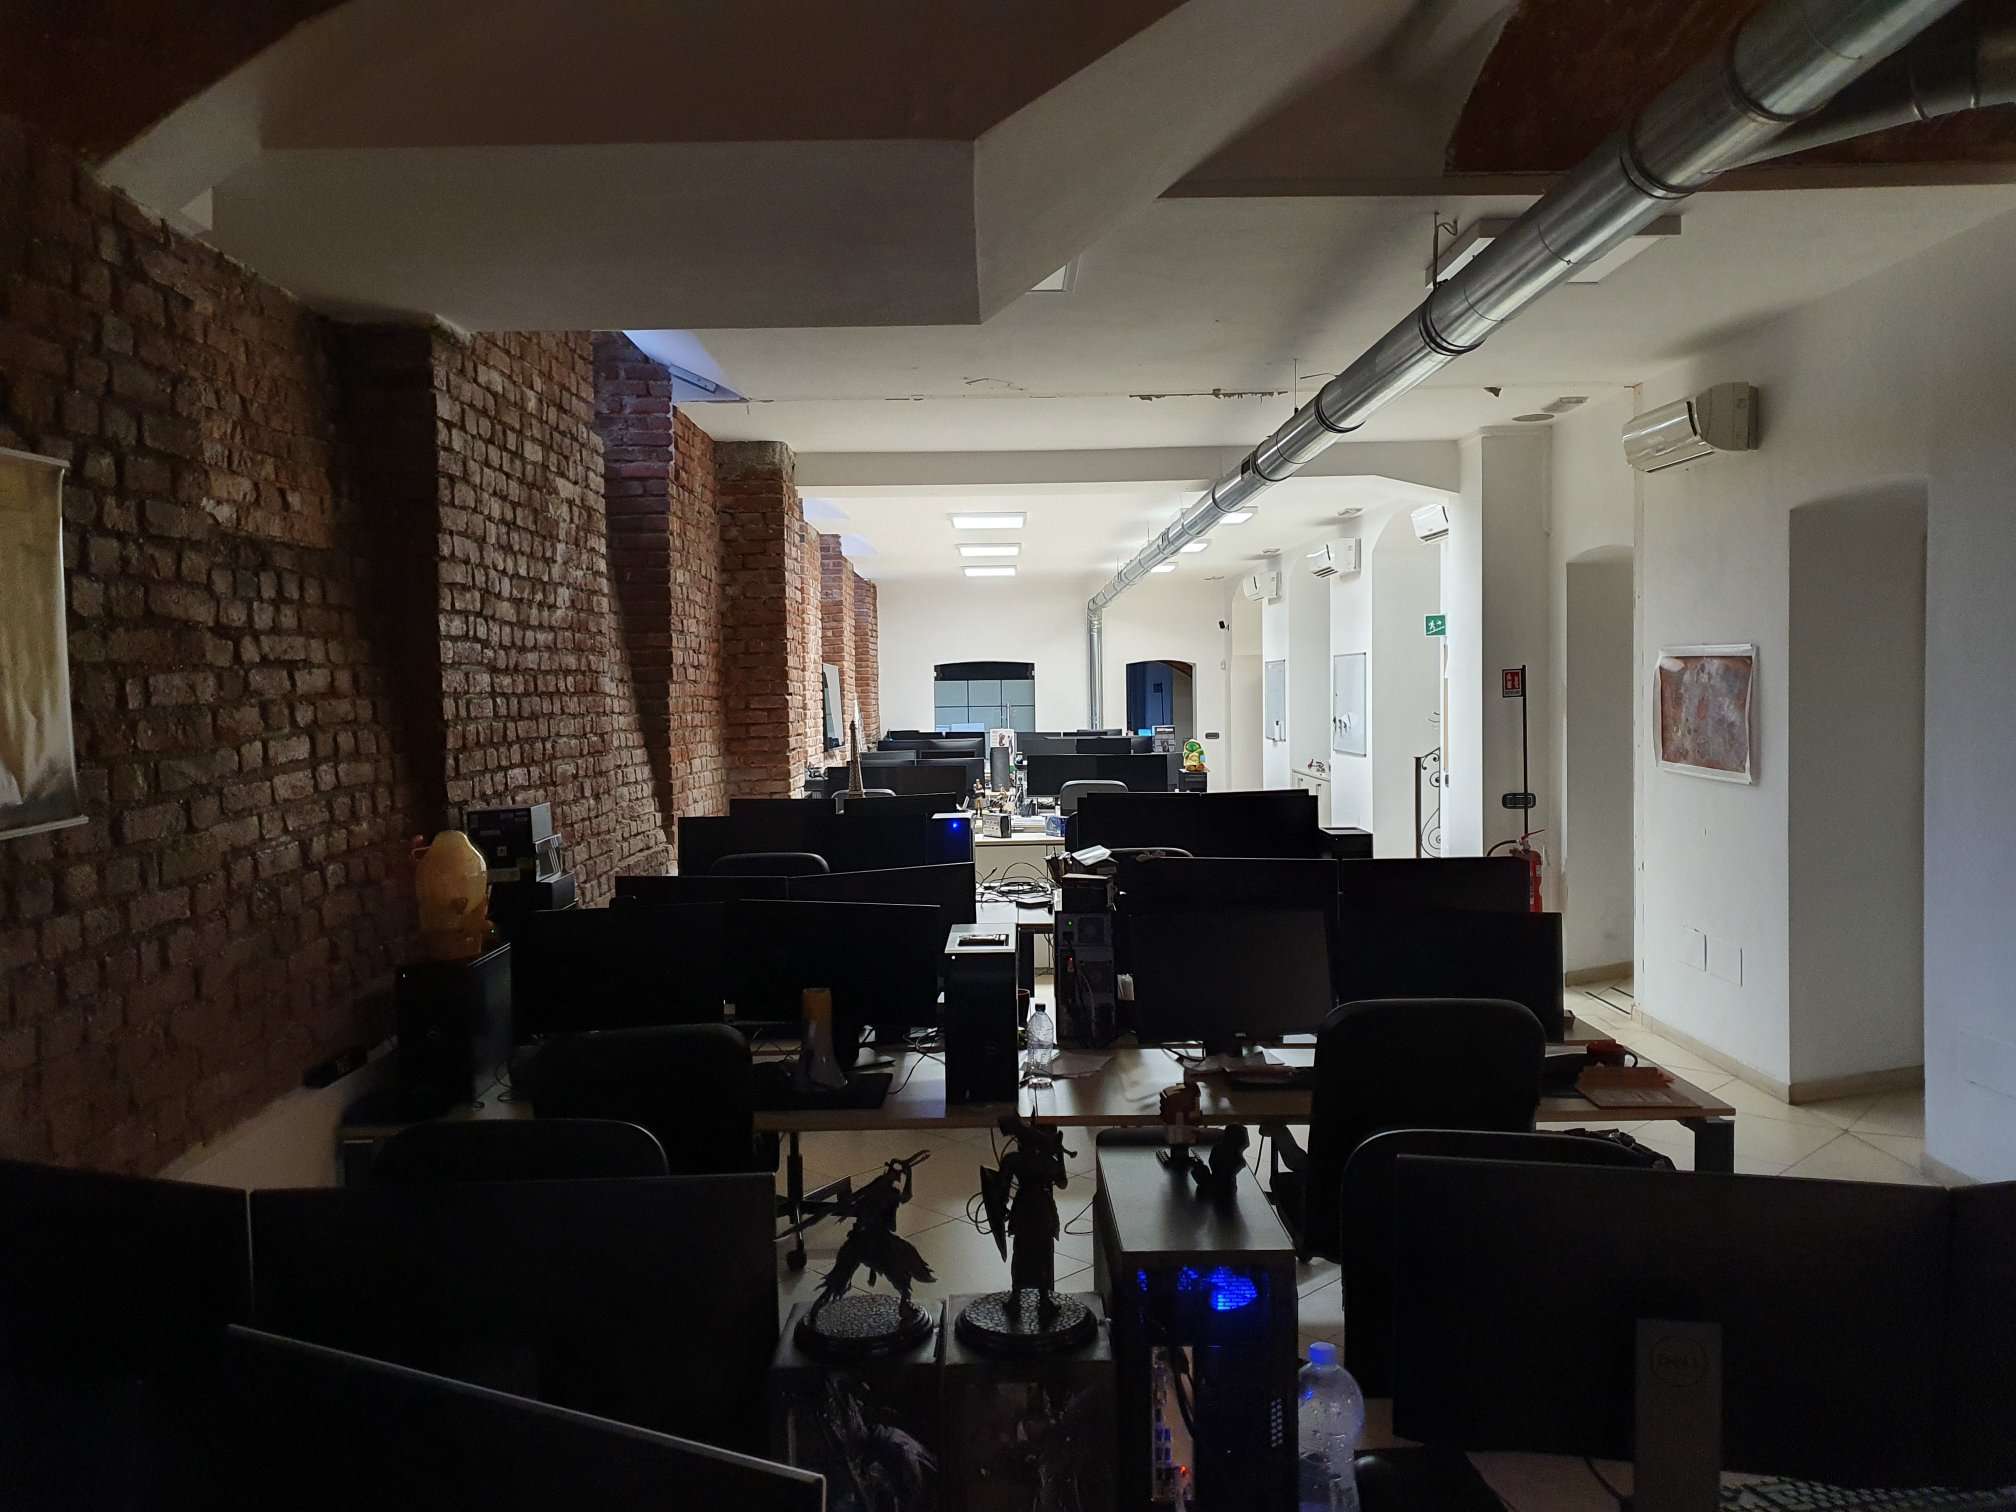 Image for Making games in lockdown: How Italy's developers are coping with COVID-19